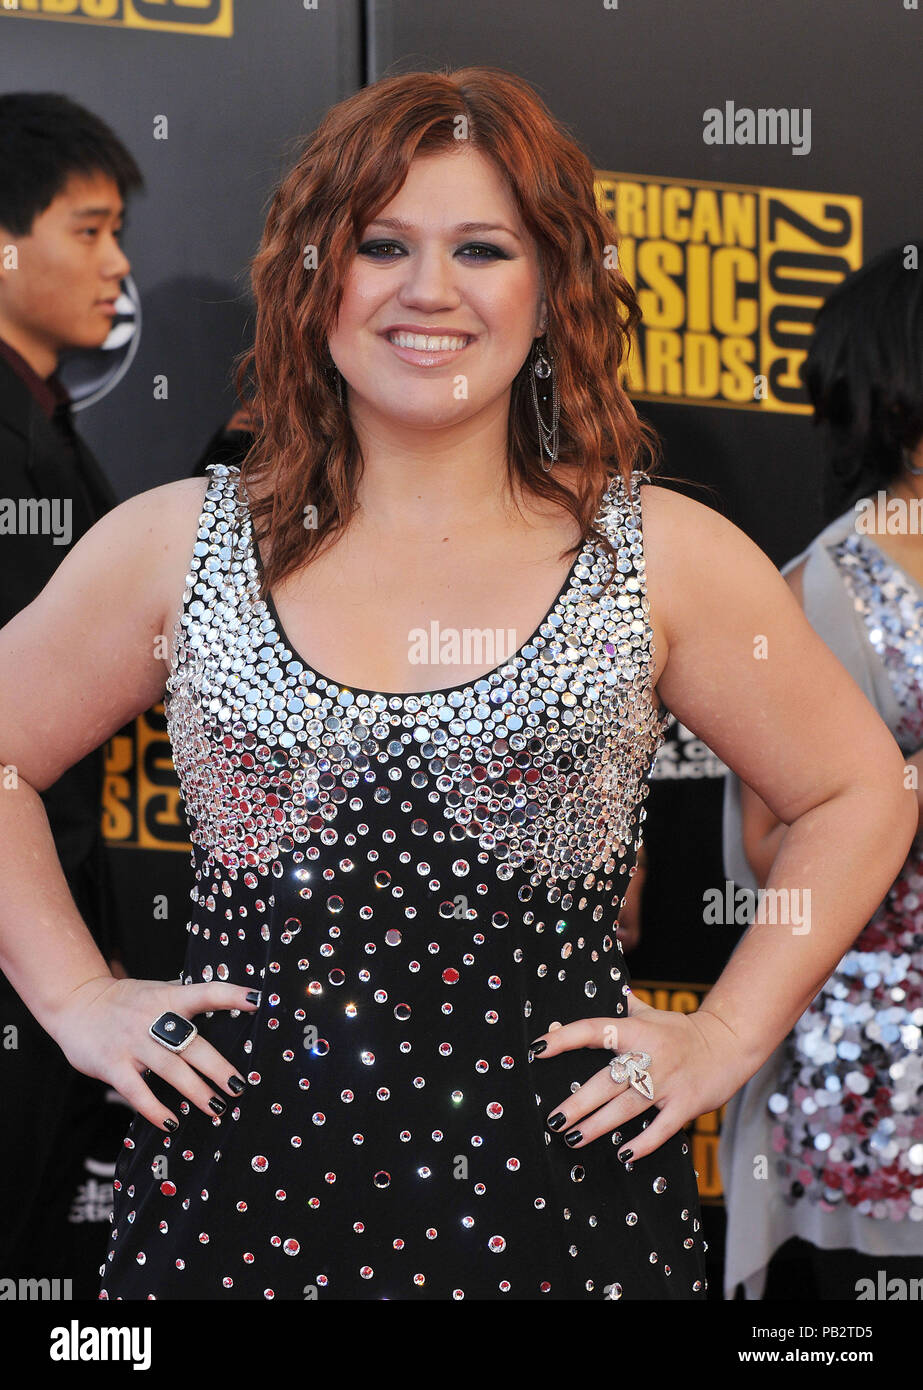 Kelly Clarkson 45 - 2009 American Music Awards at the Nokia Theatre In Los Angeles.Kelly Clarkson 26 Red Carpet Event, Vertical, USA, Film Industry, Celebrities,  Photography, Bestof, Arts Culture and Entertainment, Topix Celebrities fashion /  Vertical, Best of, Event in Hollywood Life - California,  Red Carpet and backstage, USA, Film Industry, Celebrities,  movie celebrities, TV celebrities, Music celebrities, Photography, Bestof, Arts Culture and Entertainment,  Topix, vertical, one person,, from the years , 2006 to 2009, inquiry tsuni@Gamma-USA.com - Three Quarters Stock Photo